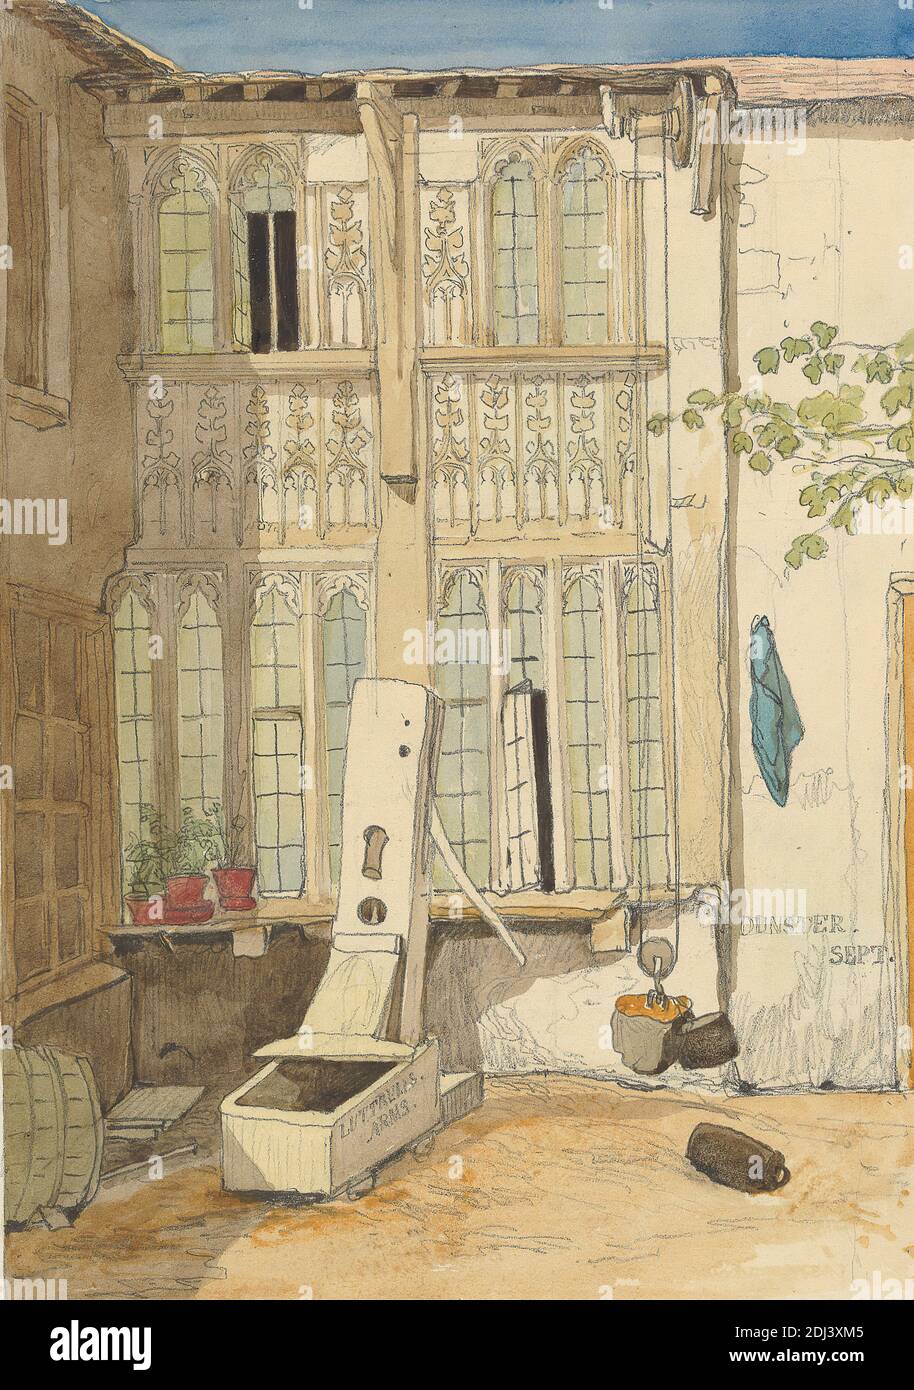 One from A Volume of Drawings and Prints, Rev. James Bulwer, 1794–1879, British, undated, Graphite and watercolor on slightly textured, moderately thick, cream wove paper, Sheet: 17 × 13 7/16 inches (43.2 × 34.1 cm) and Image: 9 9/16 × 6 3/4 inches (24.3 × 17.1 cm), architectural subject Stock Photo